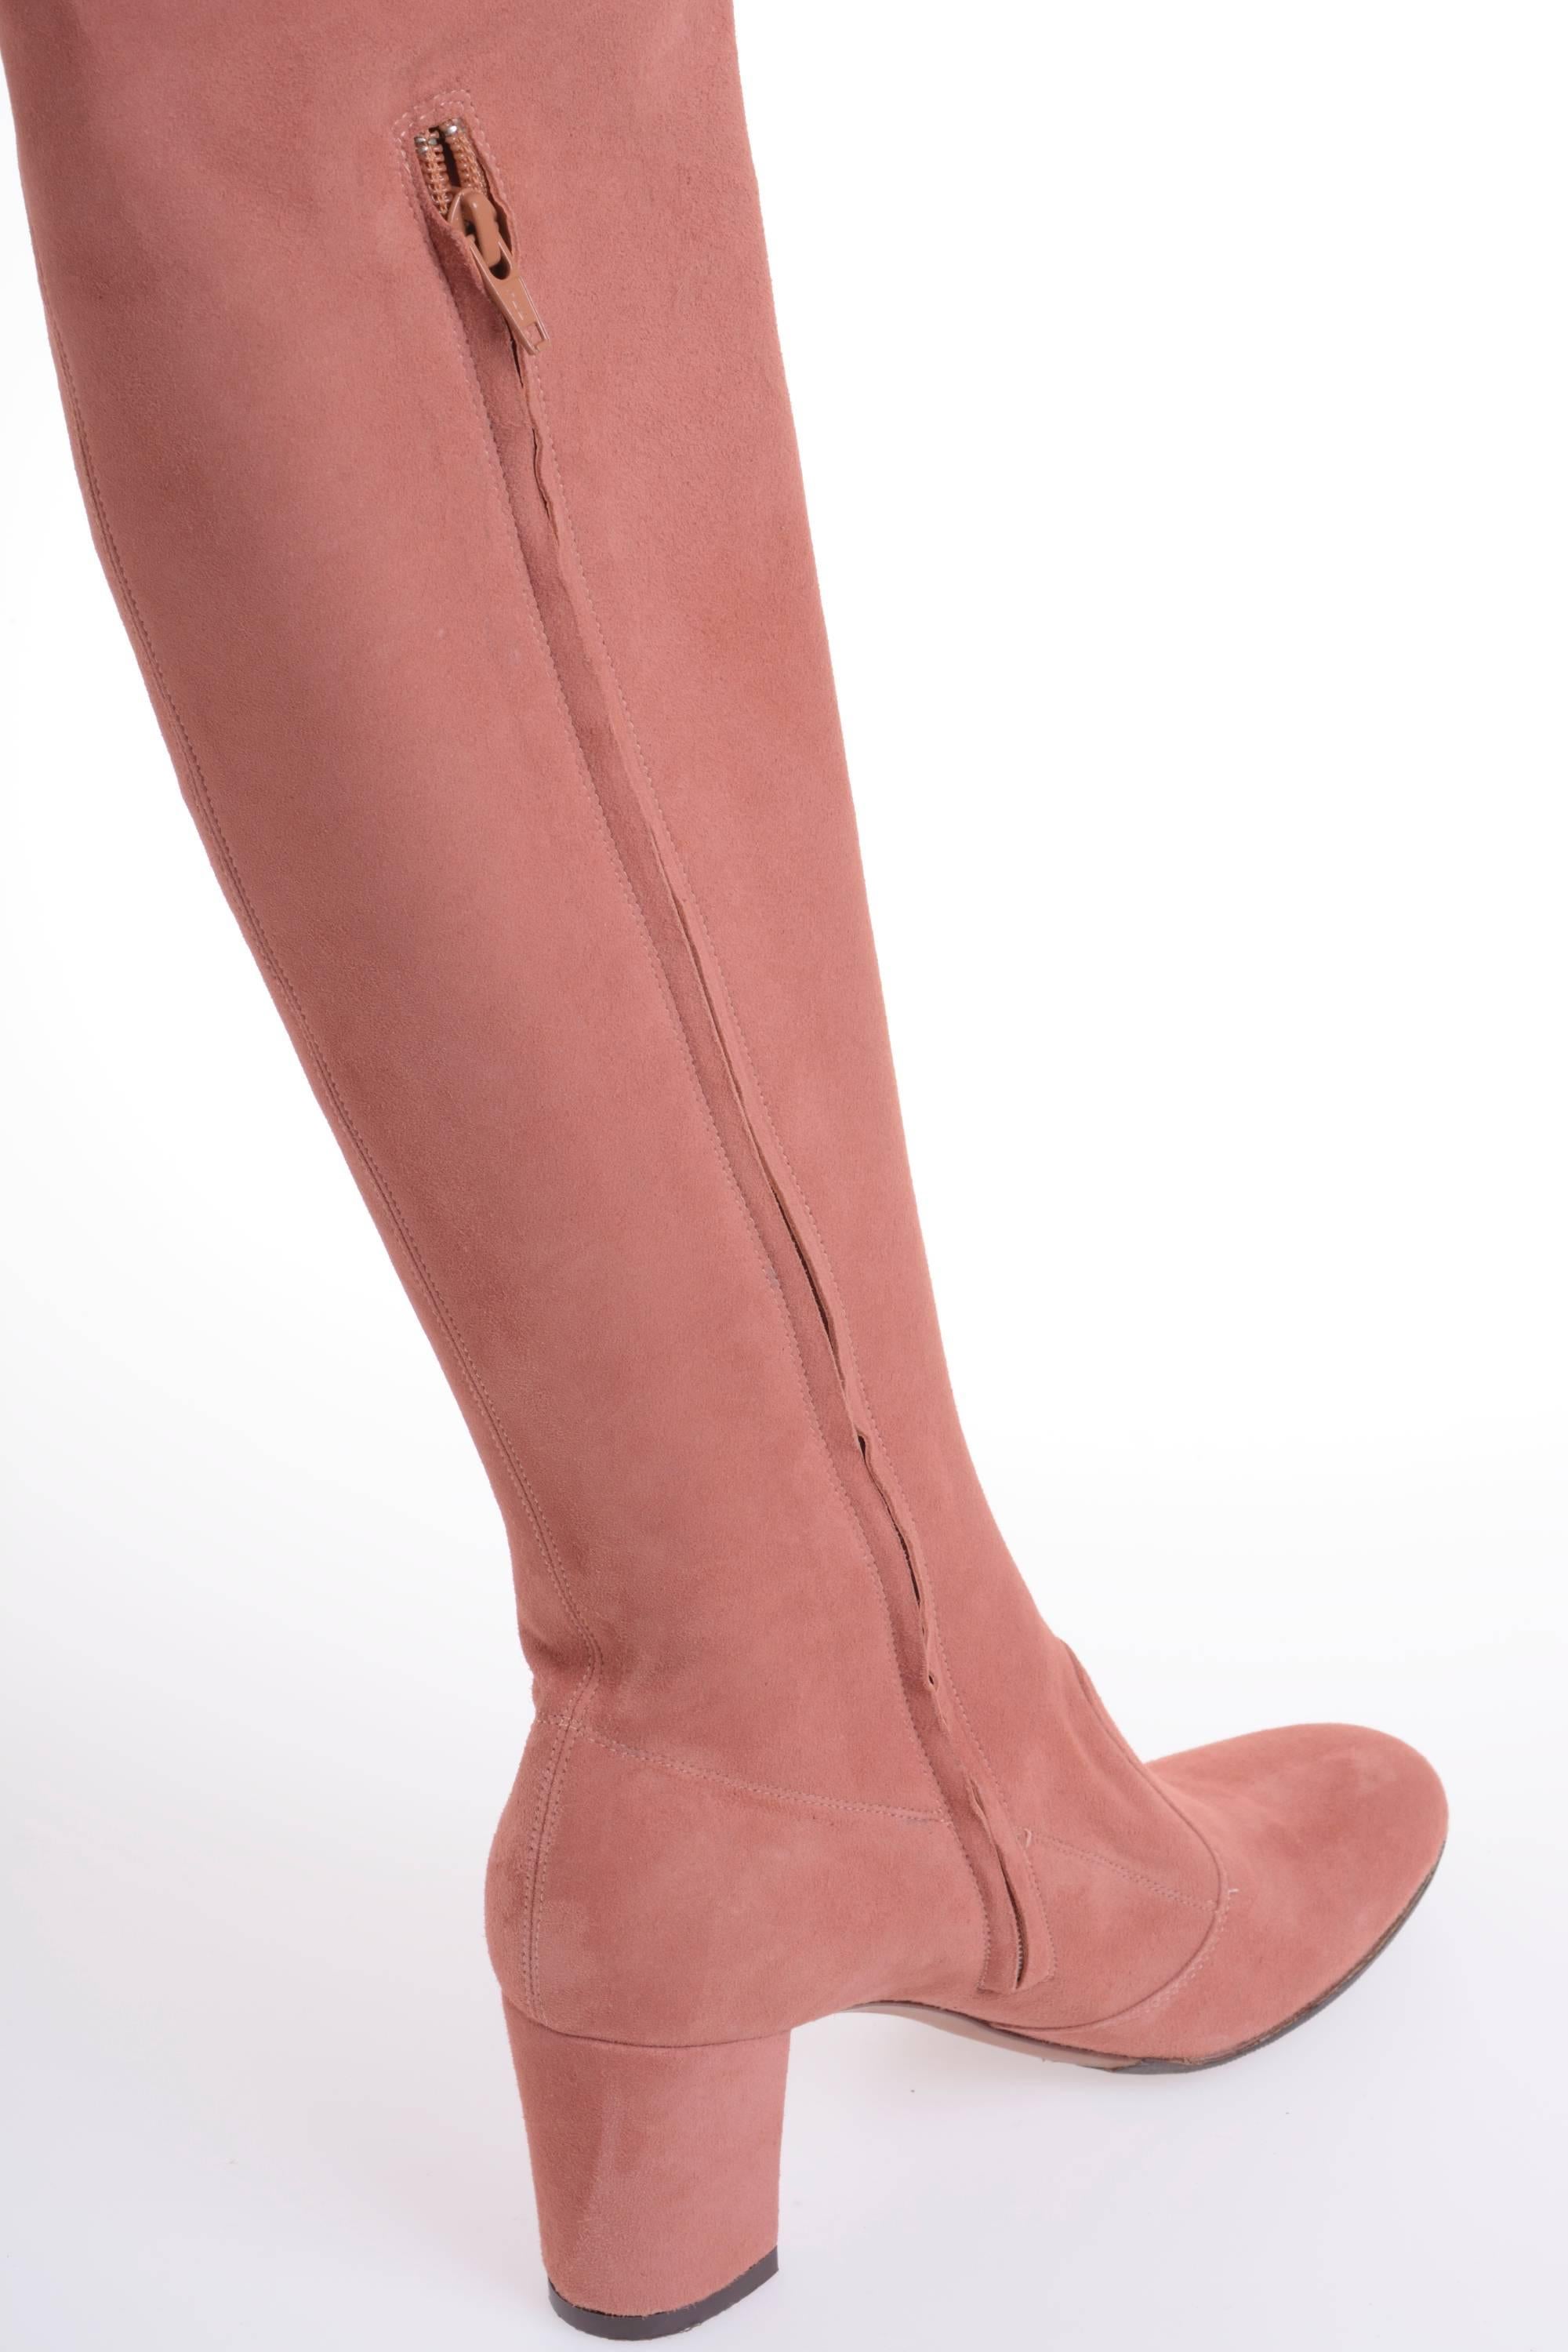 O L'AUTRE CHOSE Dark dusty rose thigh high boots, Leather upper and insole, zip closure, frontal and back decorative sewing and cut, made in vero cuoio and it has vibrate outsole. Made in Italy.

Excellent condition

Color: Dark dusty rose
Material: